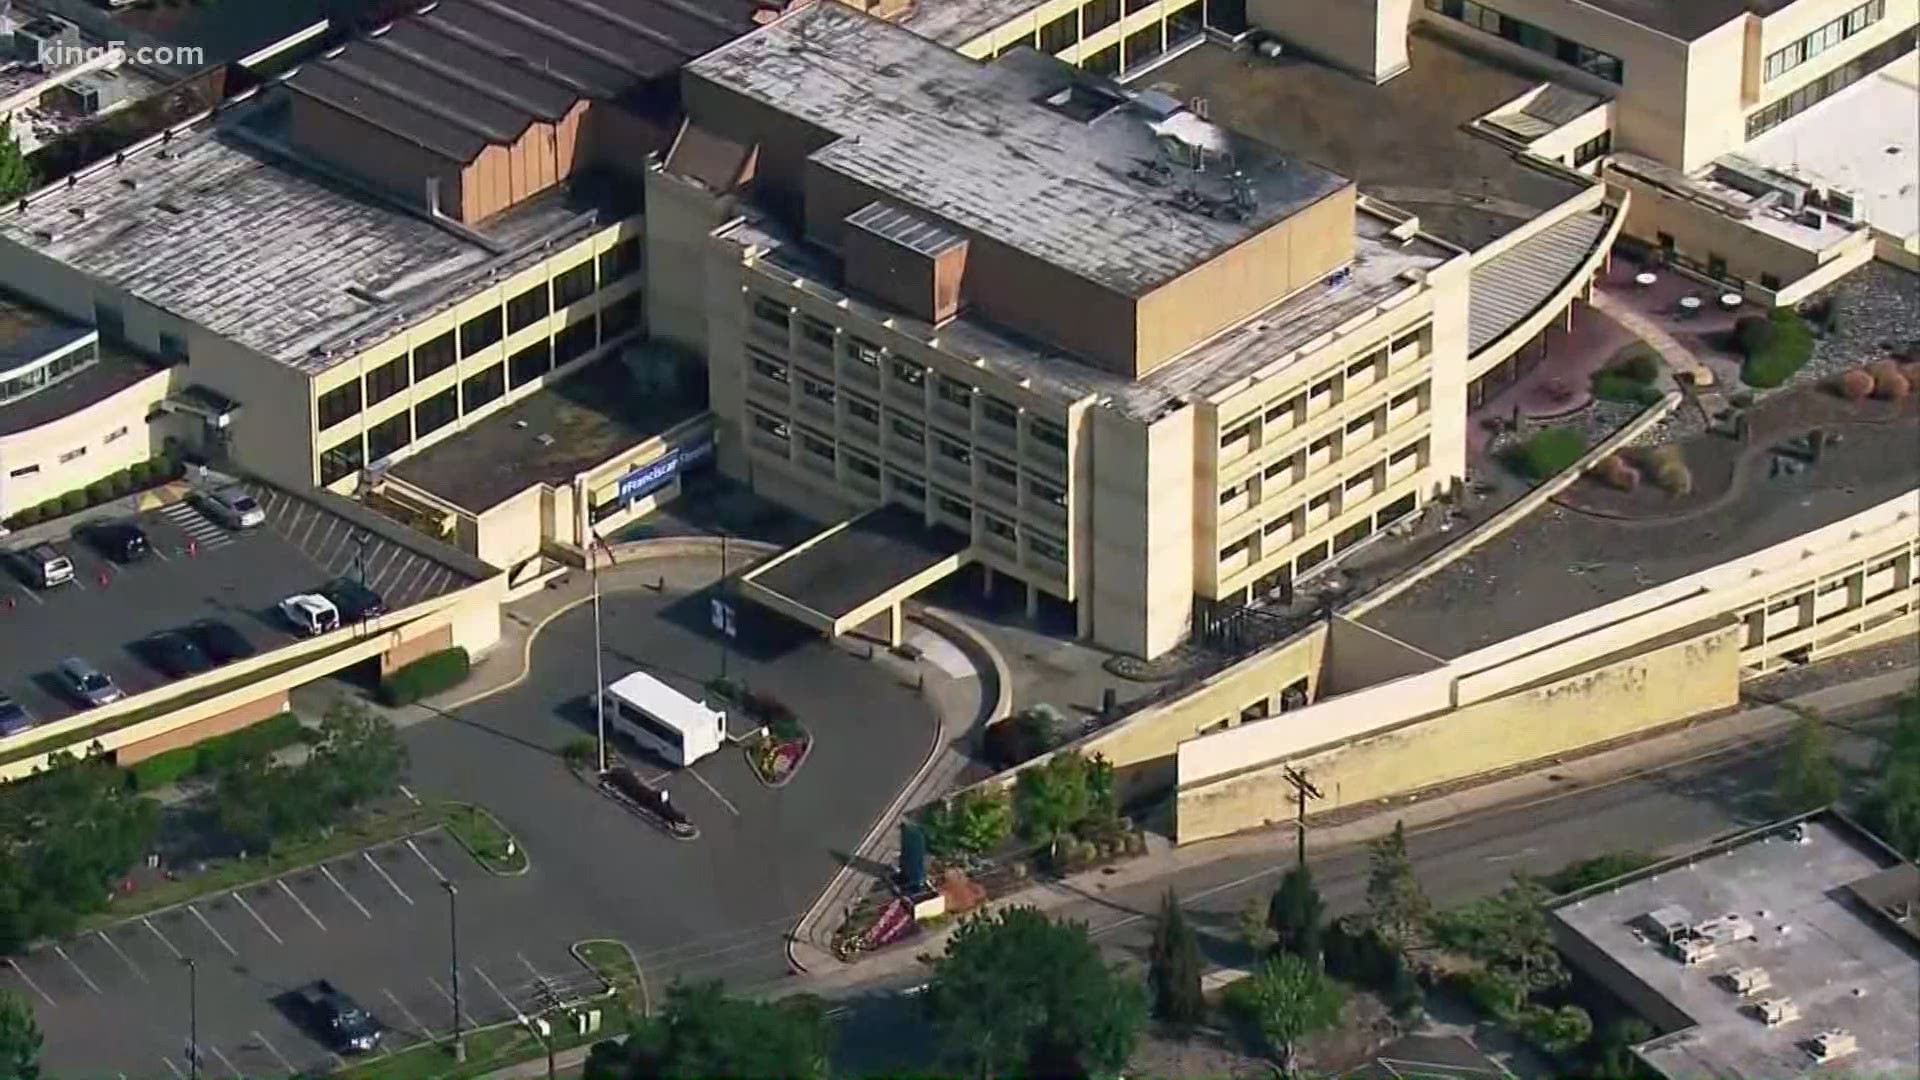 Officials expect the number of COVID-19 cases in an outbreak at St. Michael Medical Center in Bremerton to increase as all patients and staff are tested.